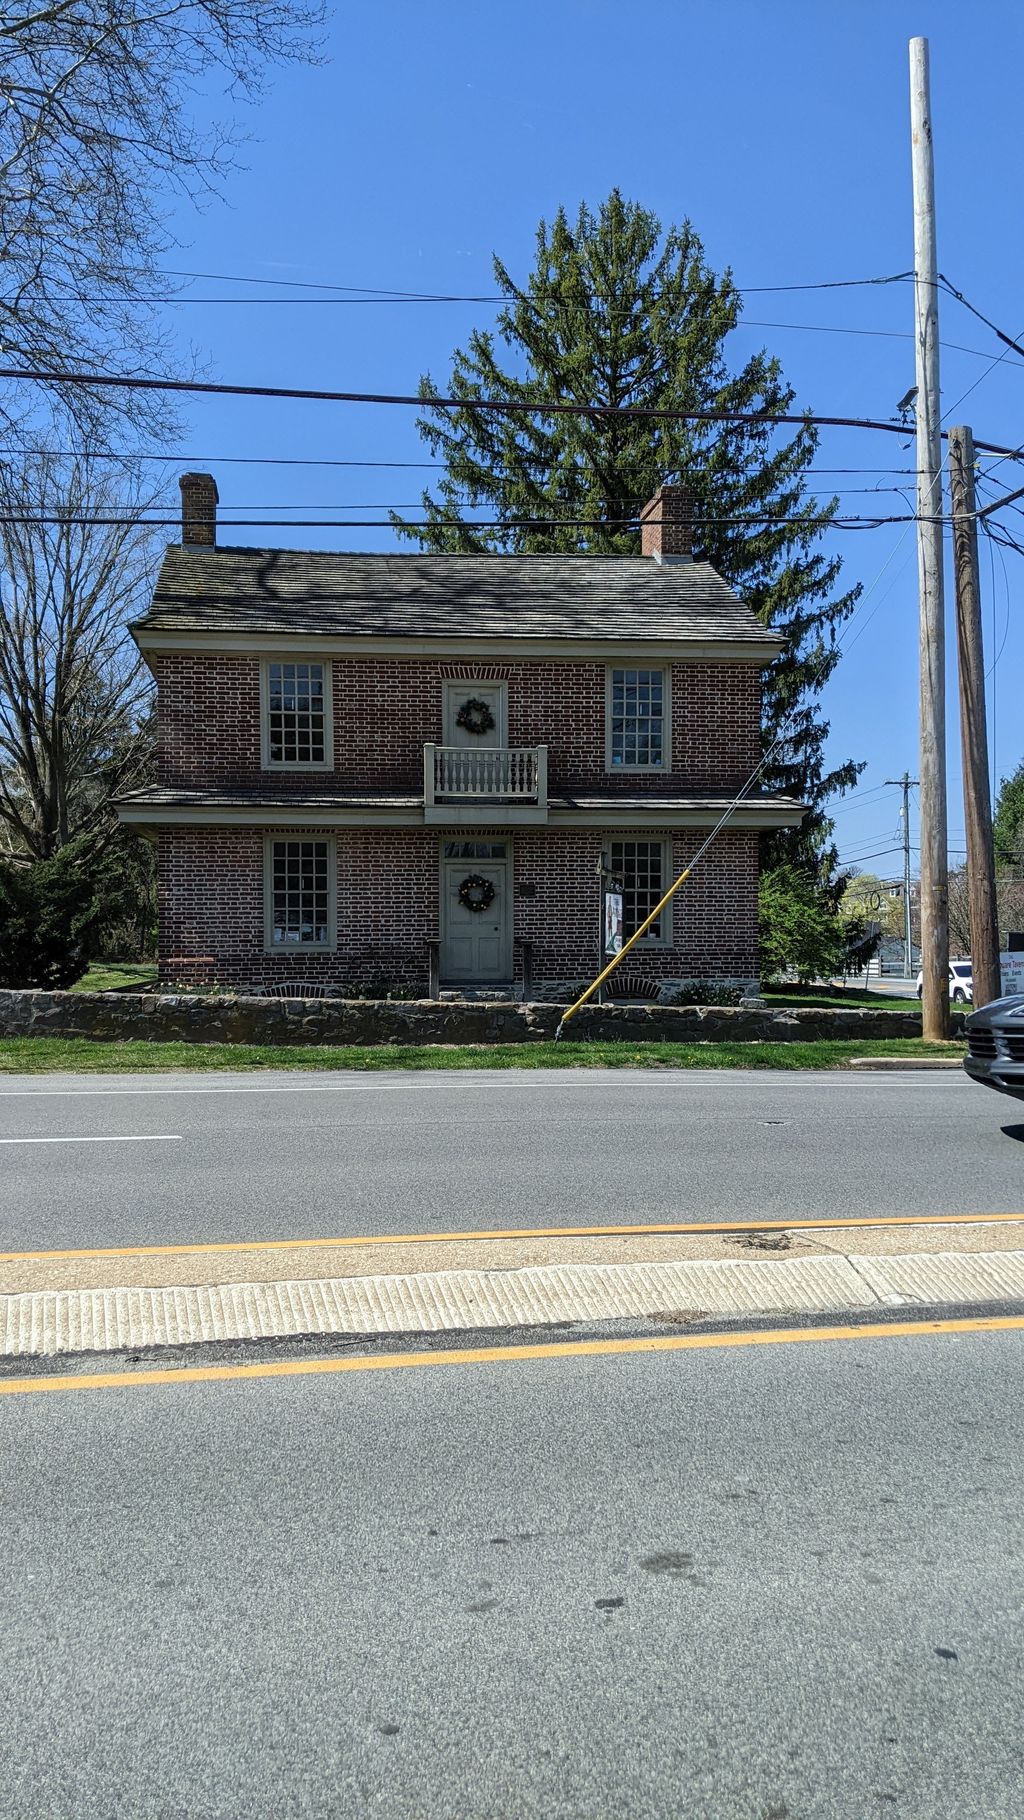 Square Tavern - Newtown Square Historical Society